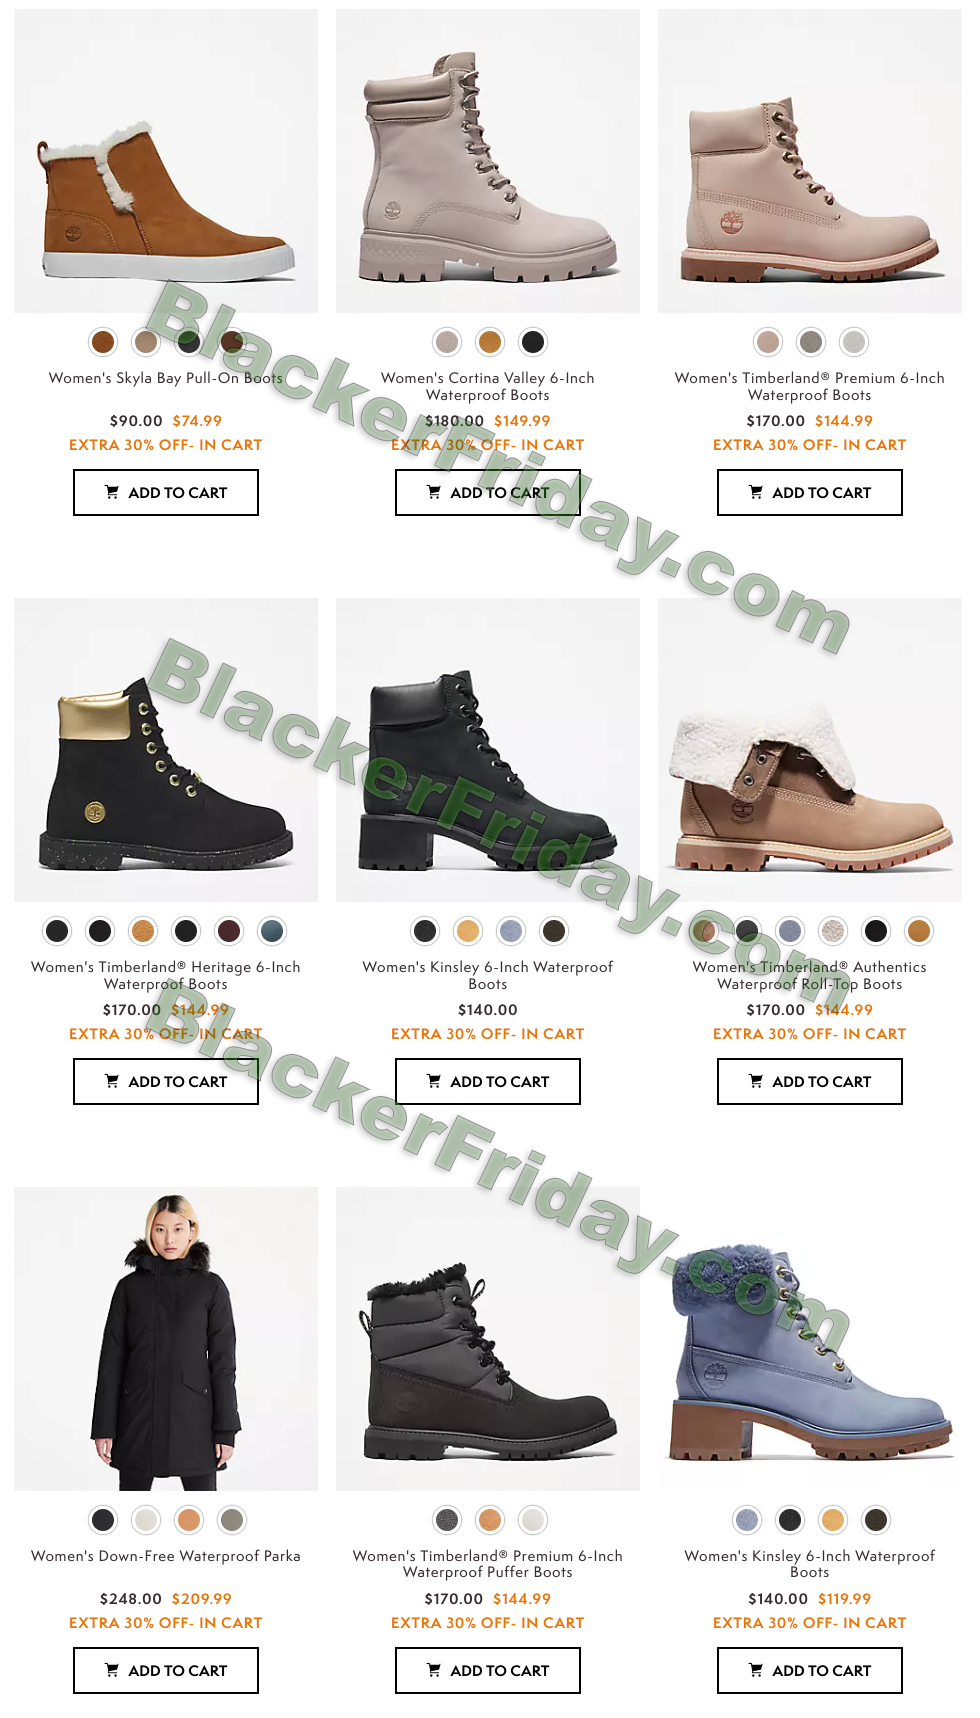 How Much Are Timberlands on Black Friday?